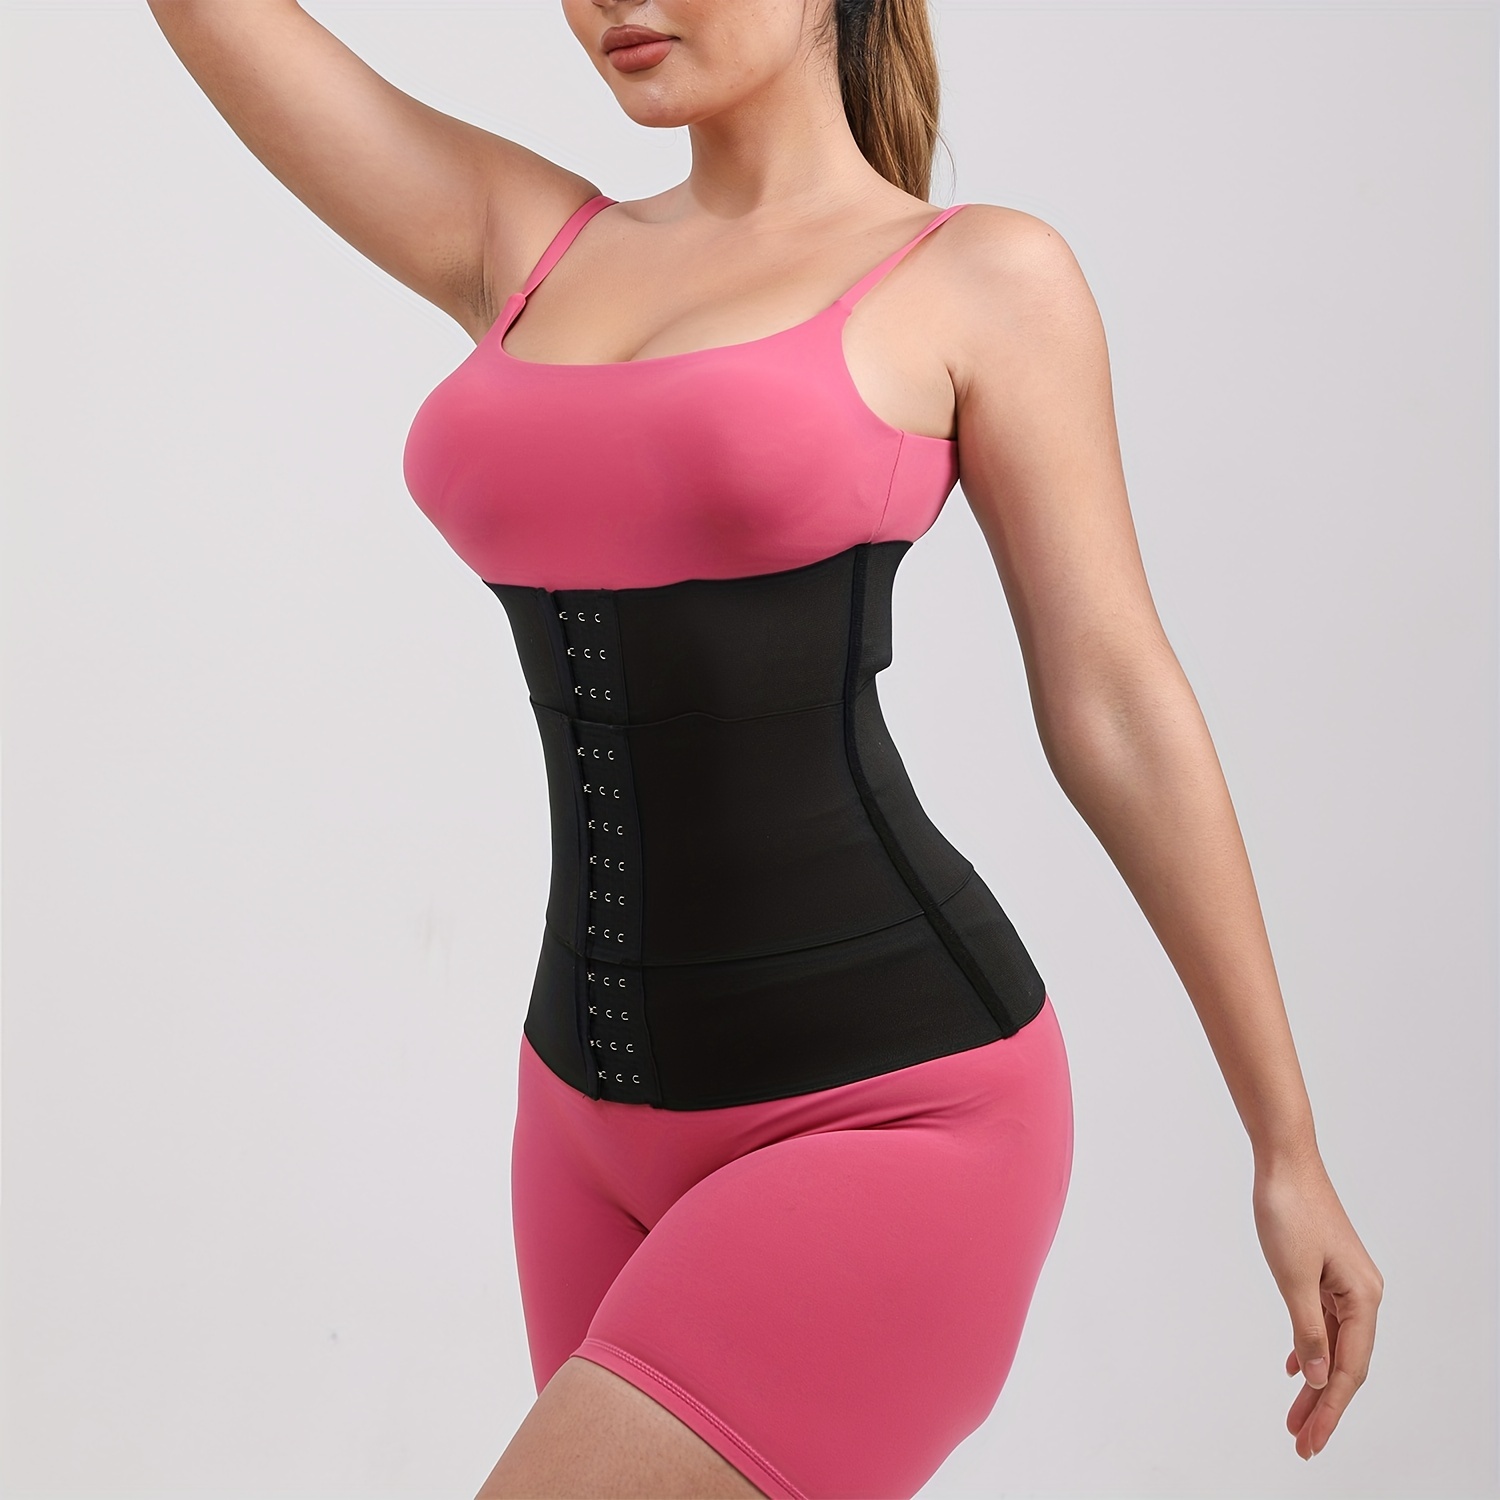 Hot Shapers Waist Trainers in Exercise & Fitness Accessories